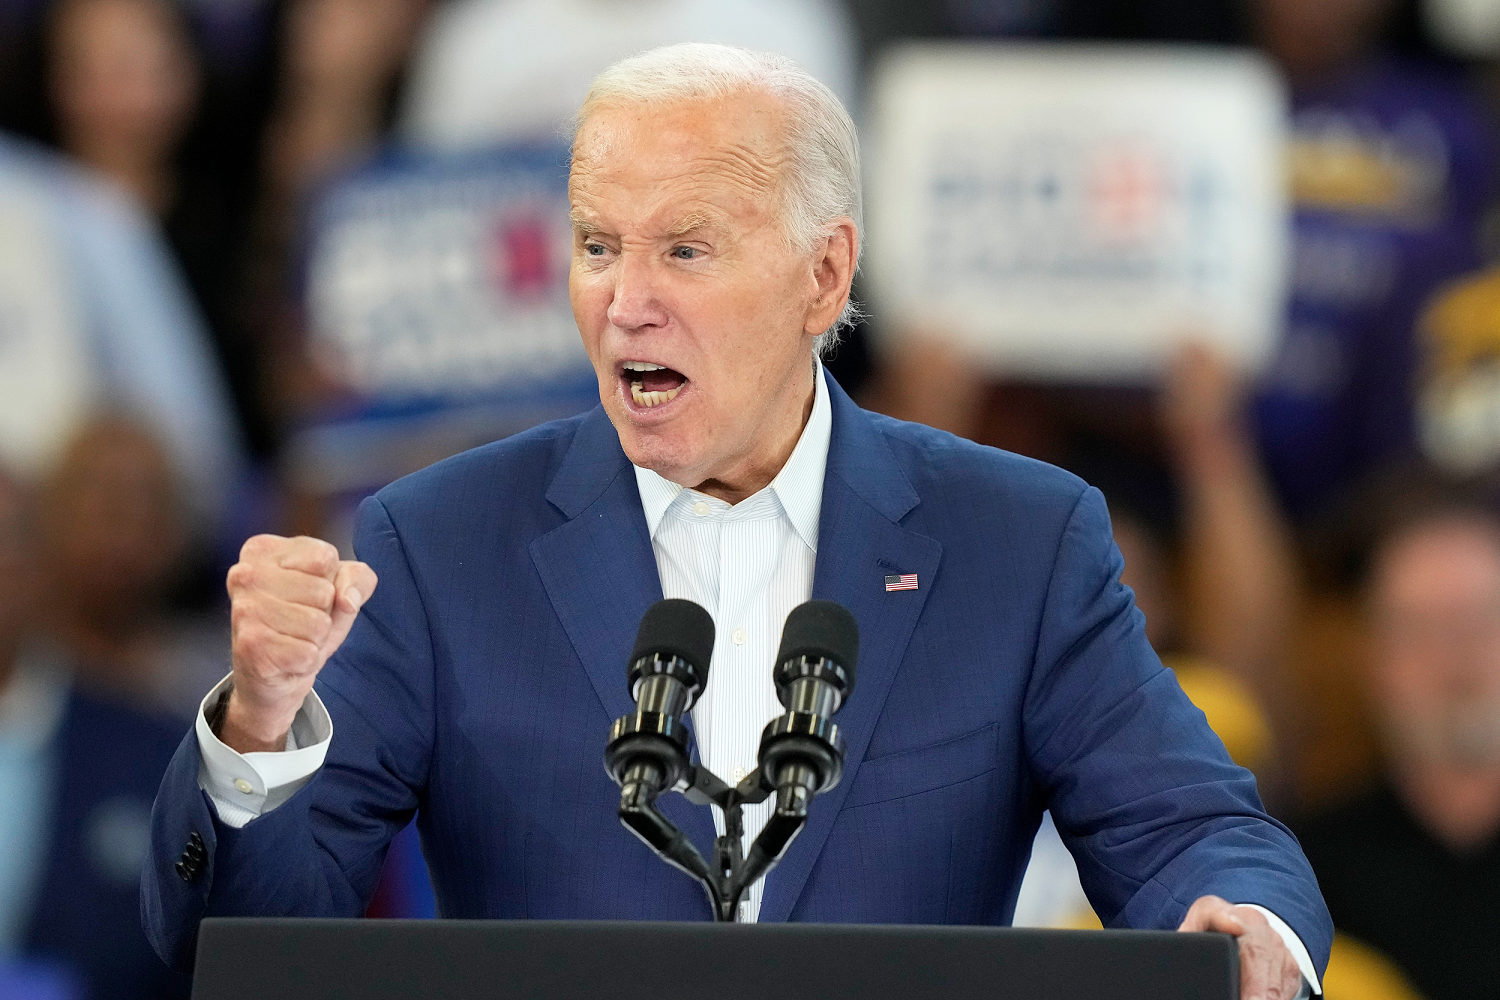 Democrats are banking on outperforming Biden in key Senate races